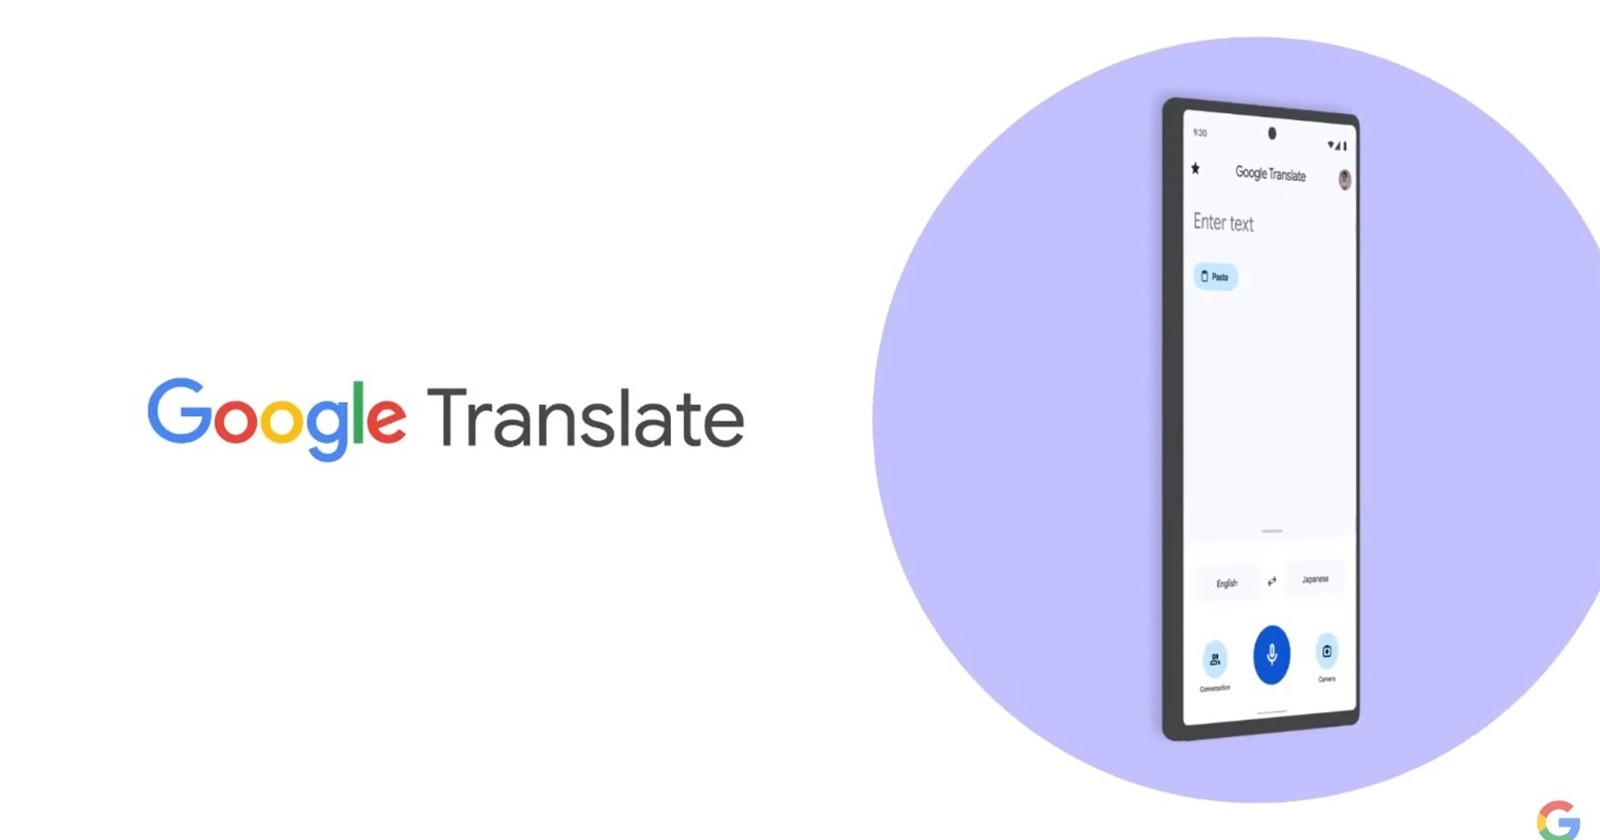 Google Translate update (v8.0/8.1) silently adds new features